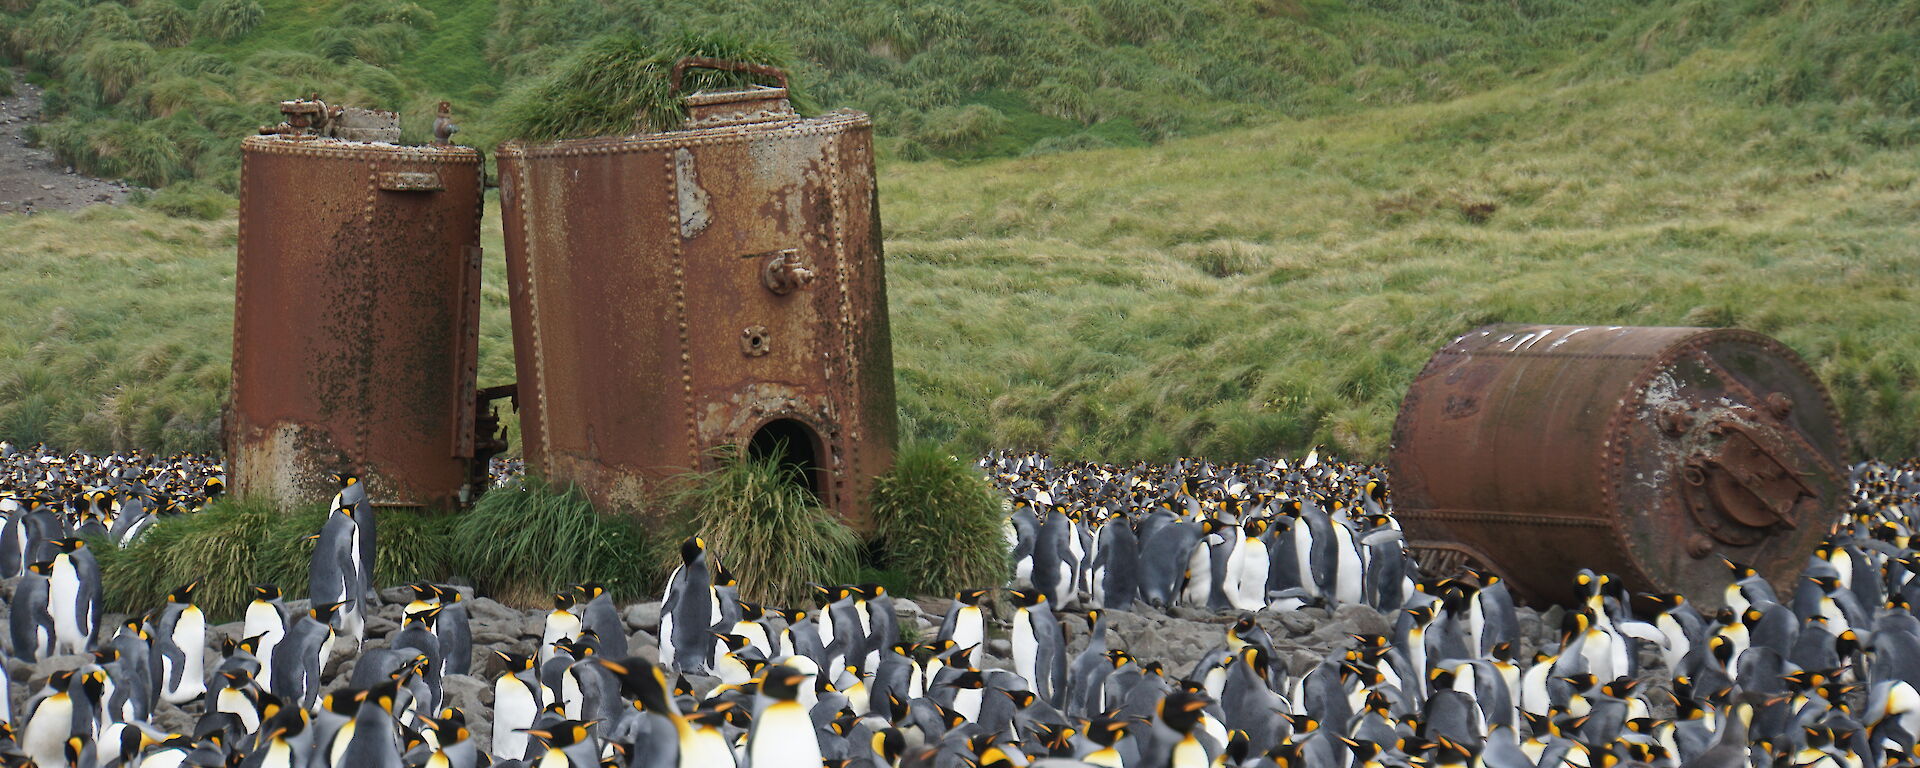 Big rusty steel drums stand behind a colony of king penguins.